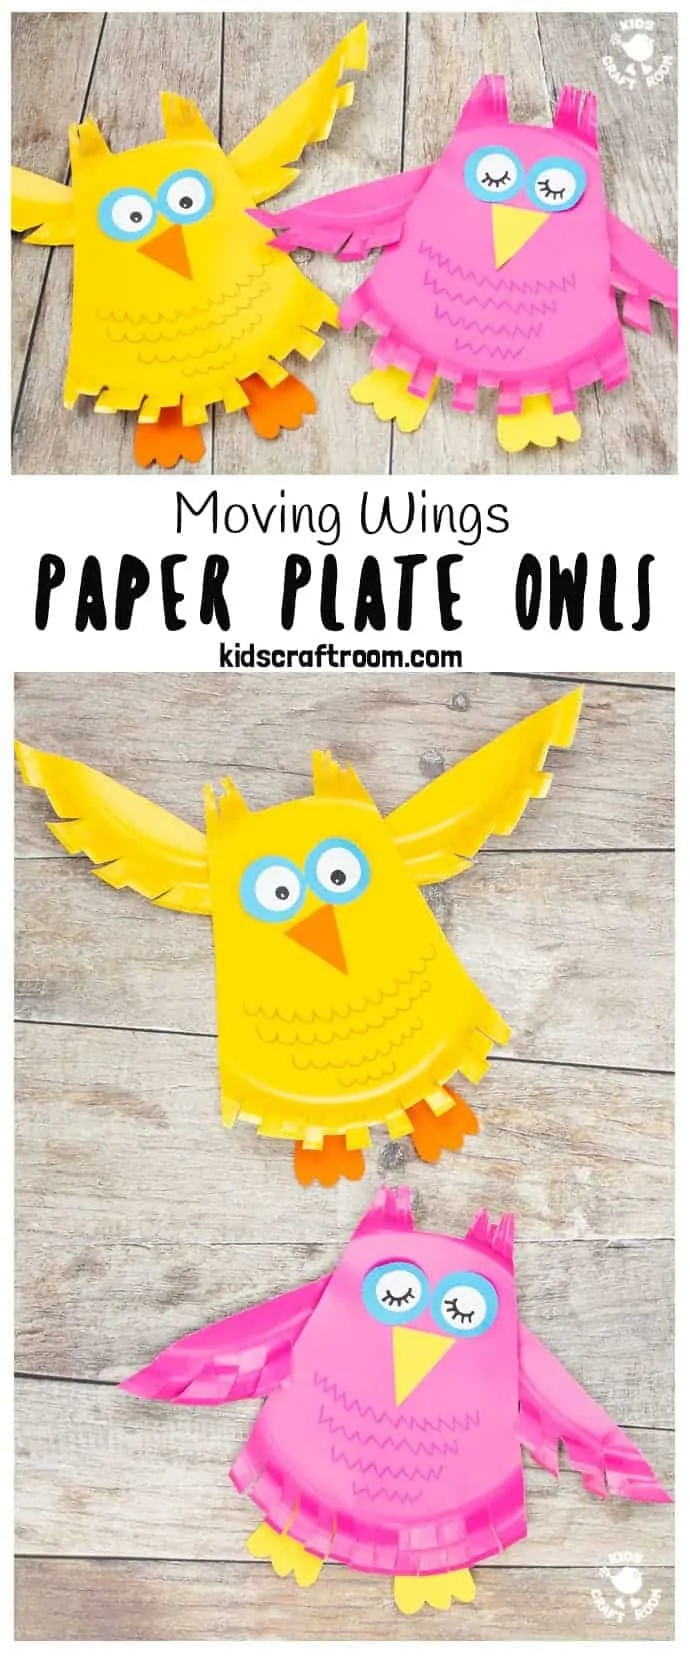 Paper plate owl craft pin image